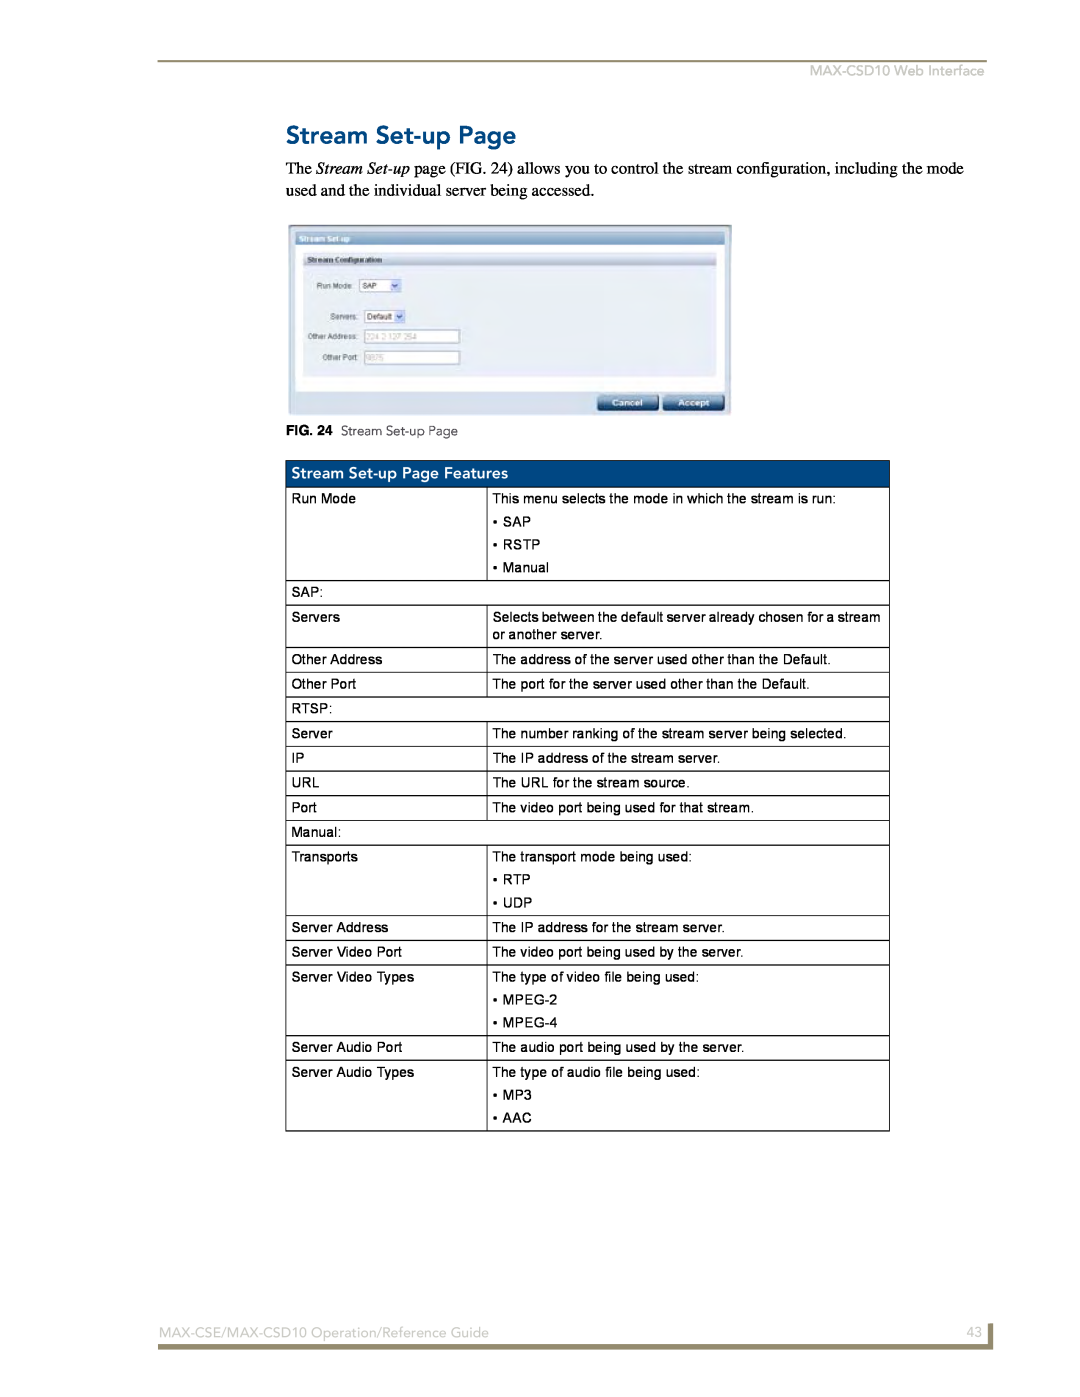 AMX MAX-CSD 10 manual Stream Set-upPage Features, MAX-CSD10Web Interface, MAX-CSE/MAX-CSD10Operation/Reference Guide 